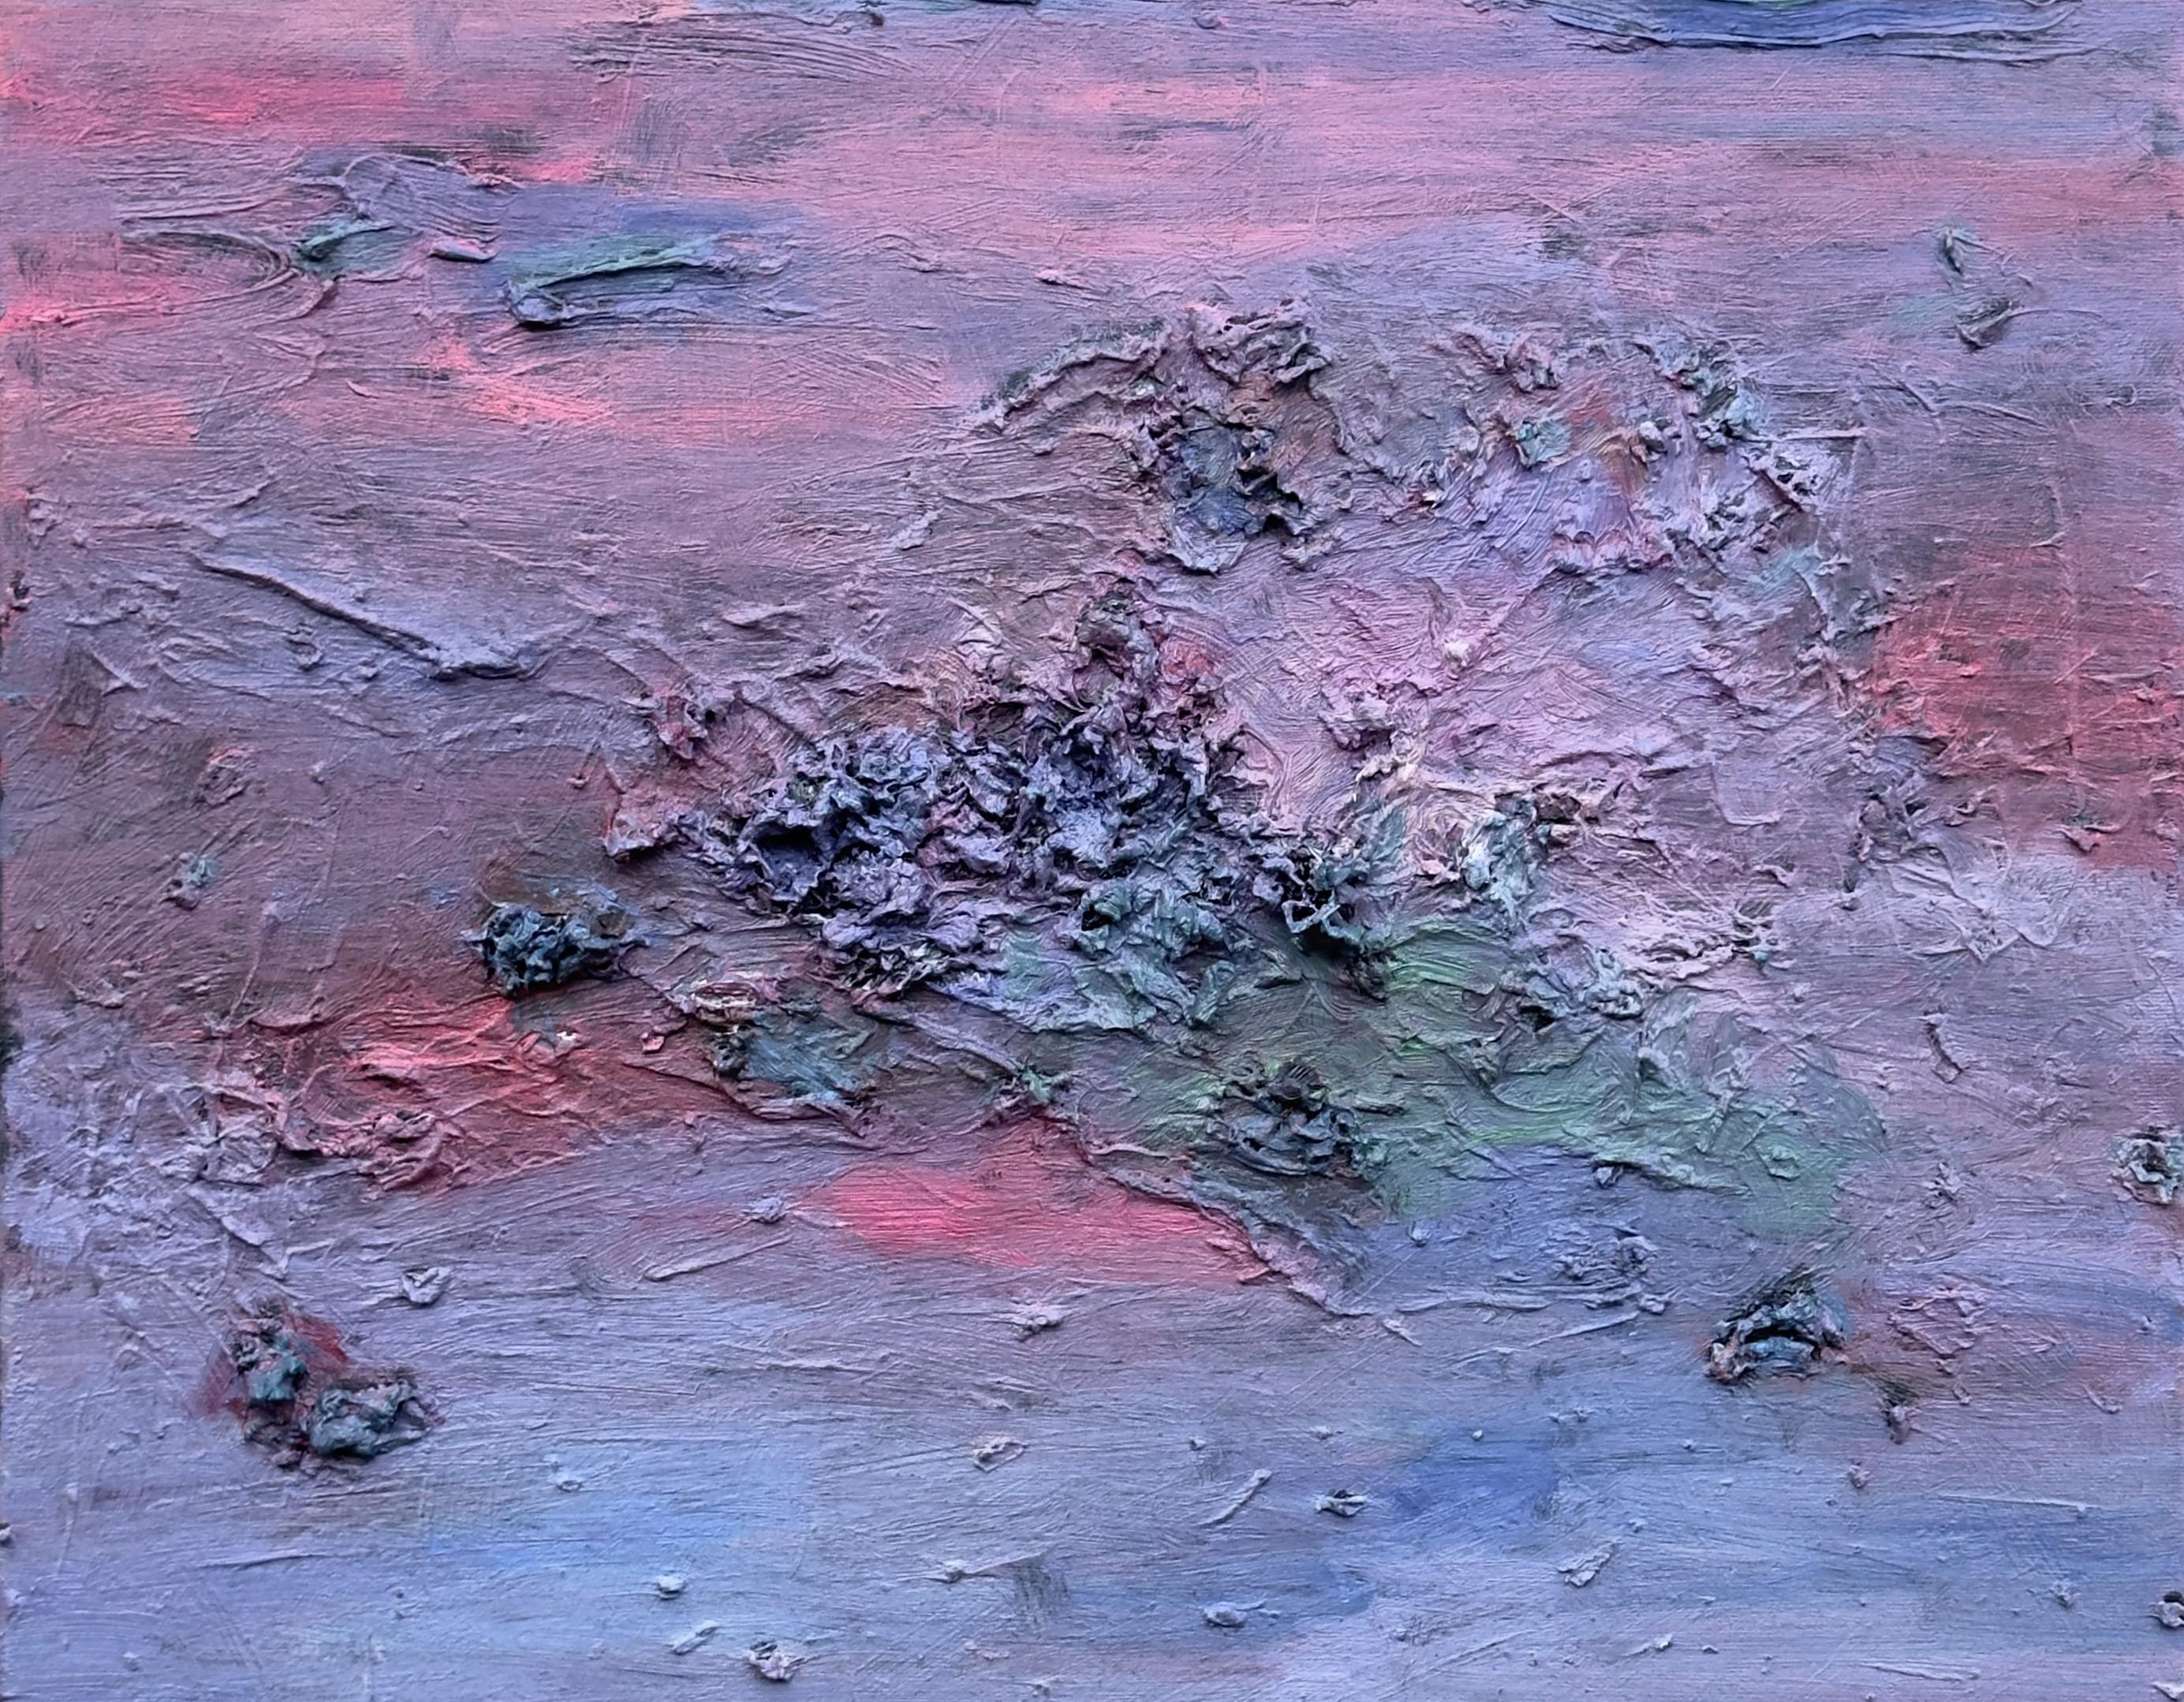 Body in the Field #1 - Abstract painting, landscape, blue, pink - Abstract Expressionist Painting by Zsolt Berszán